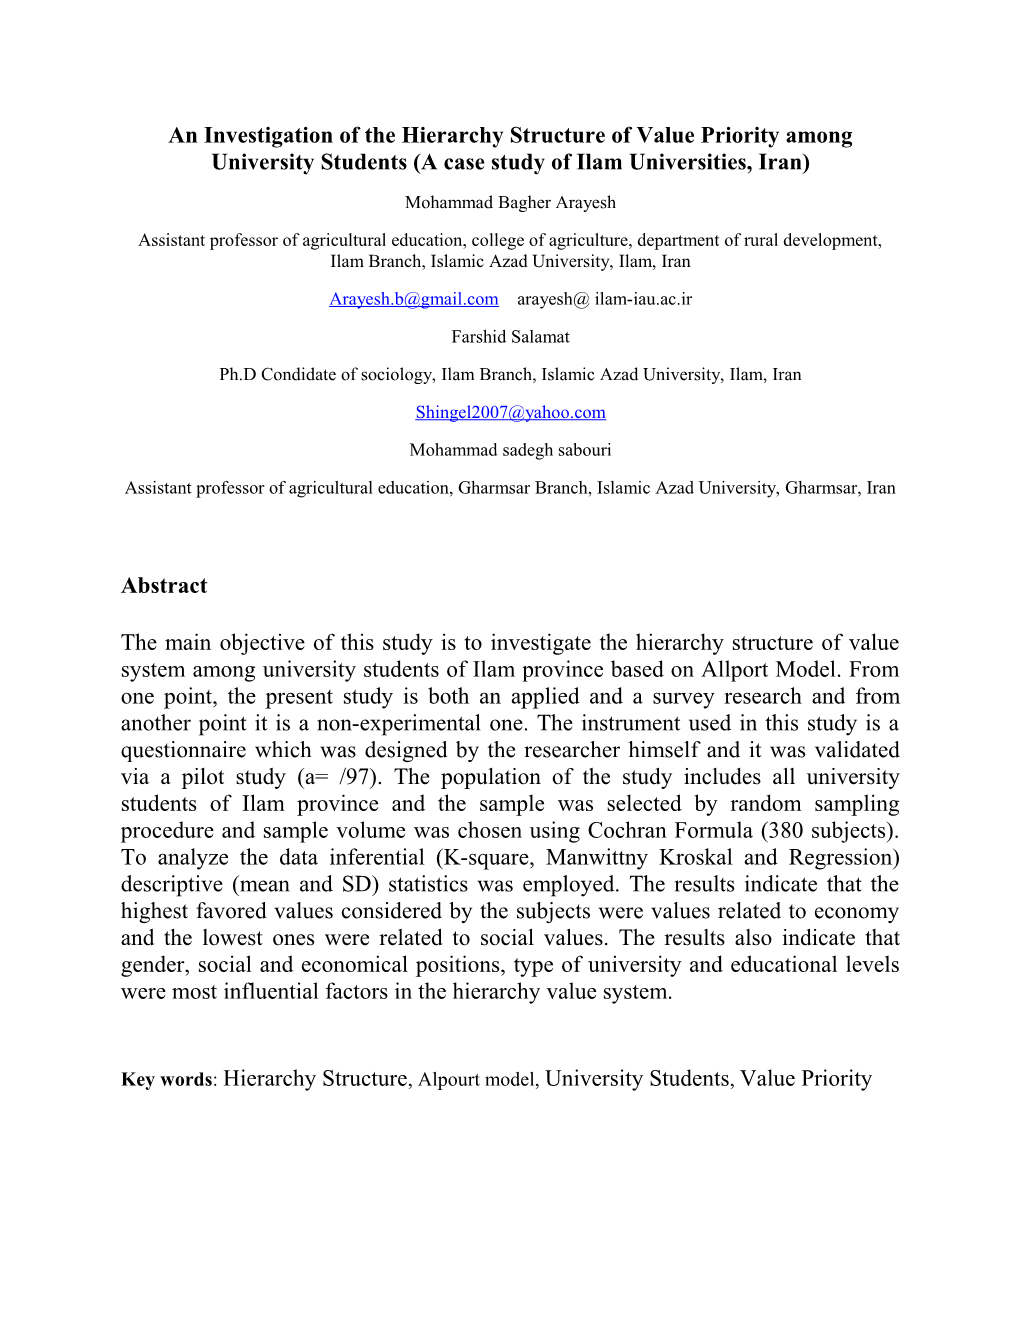 An Investigation of the Hierarchy Structure of Value Priority Among University Students